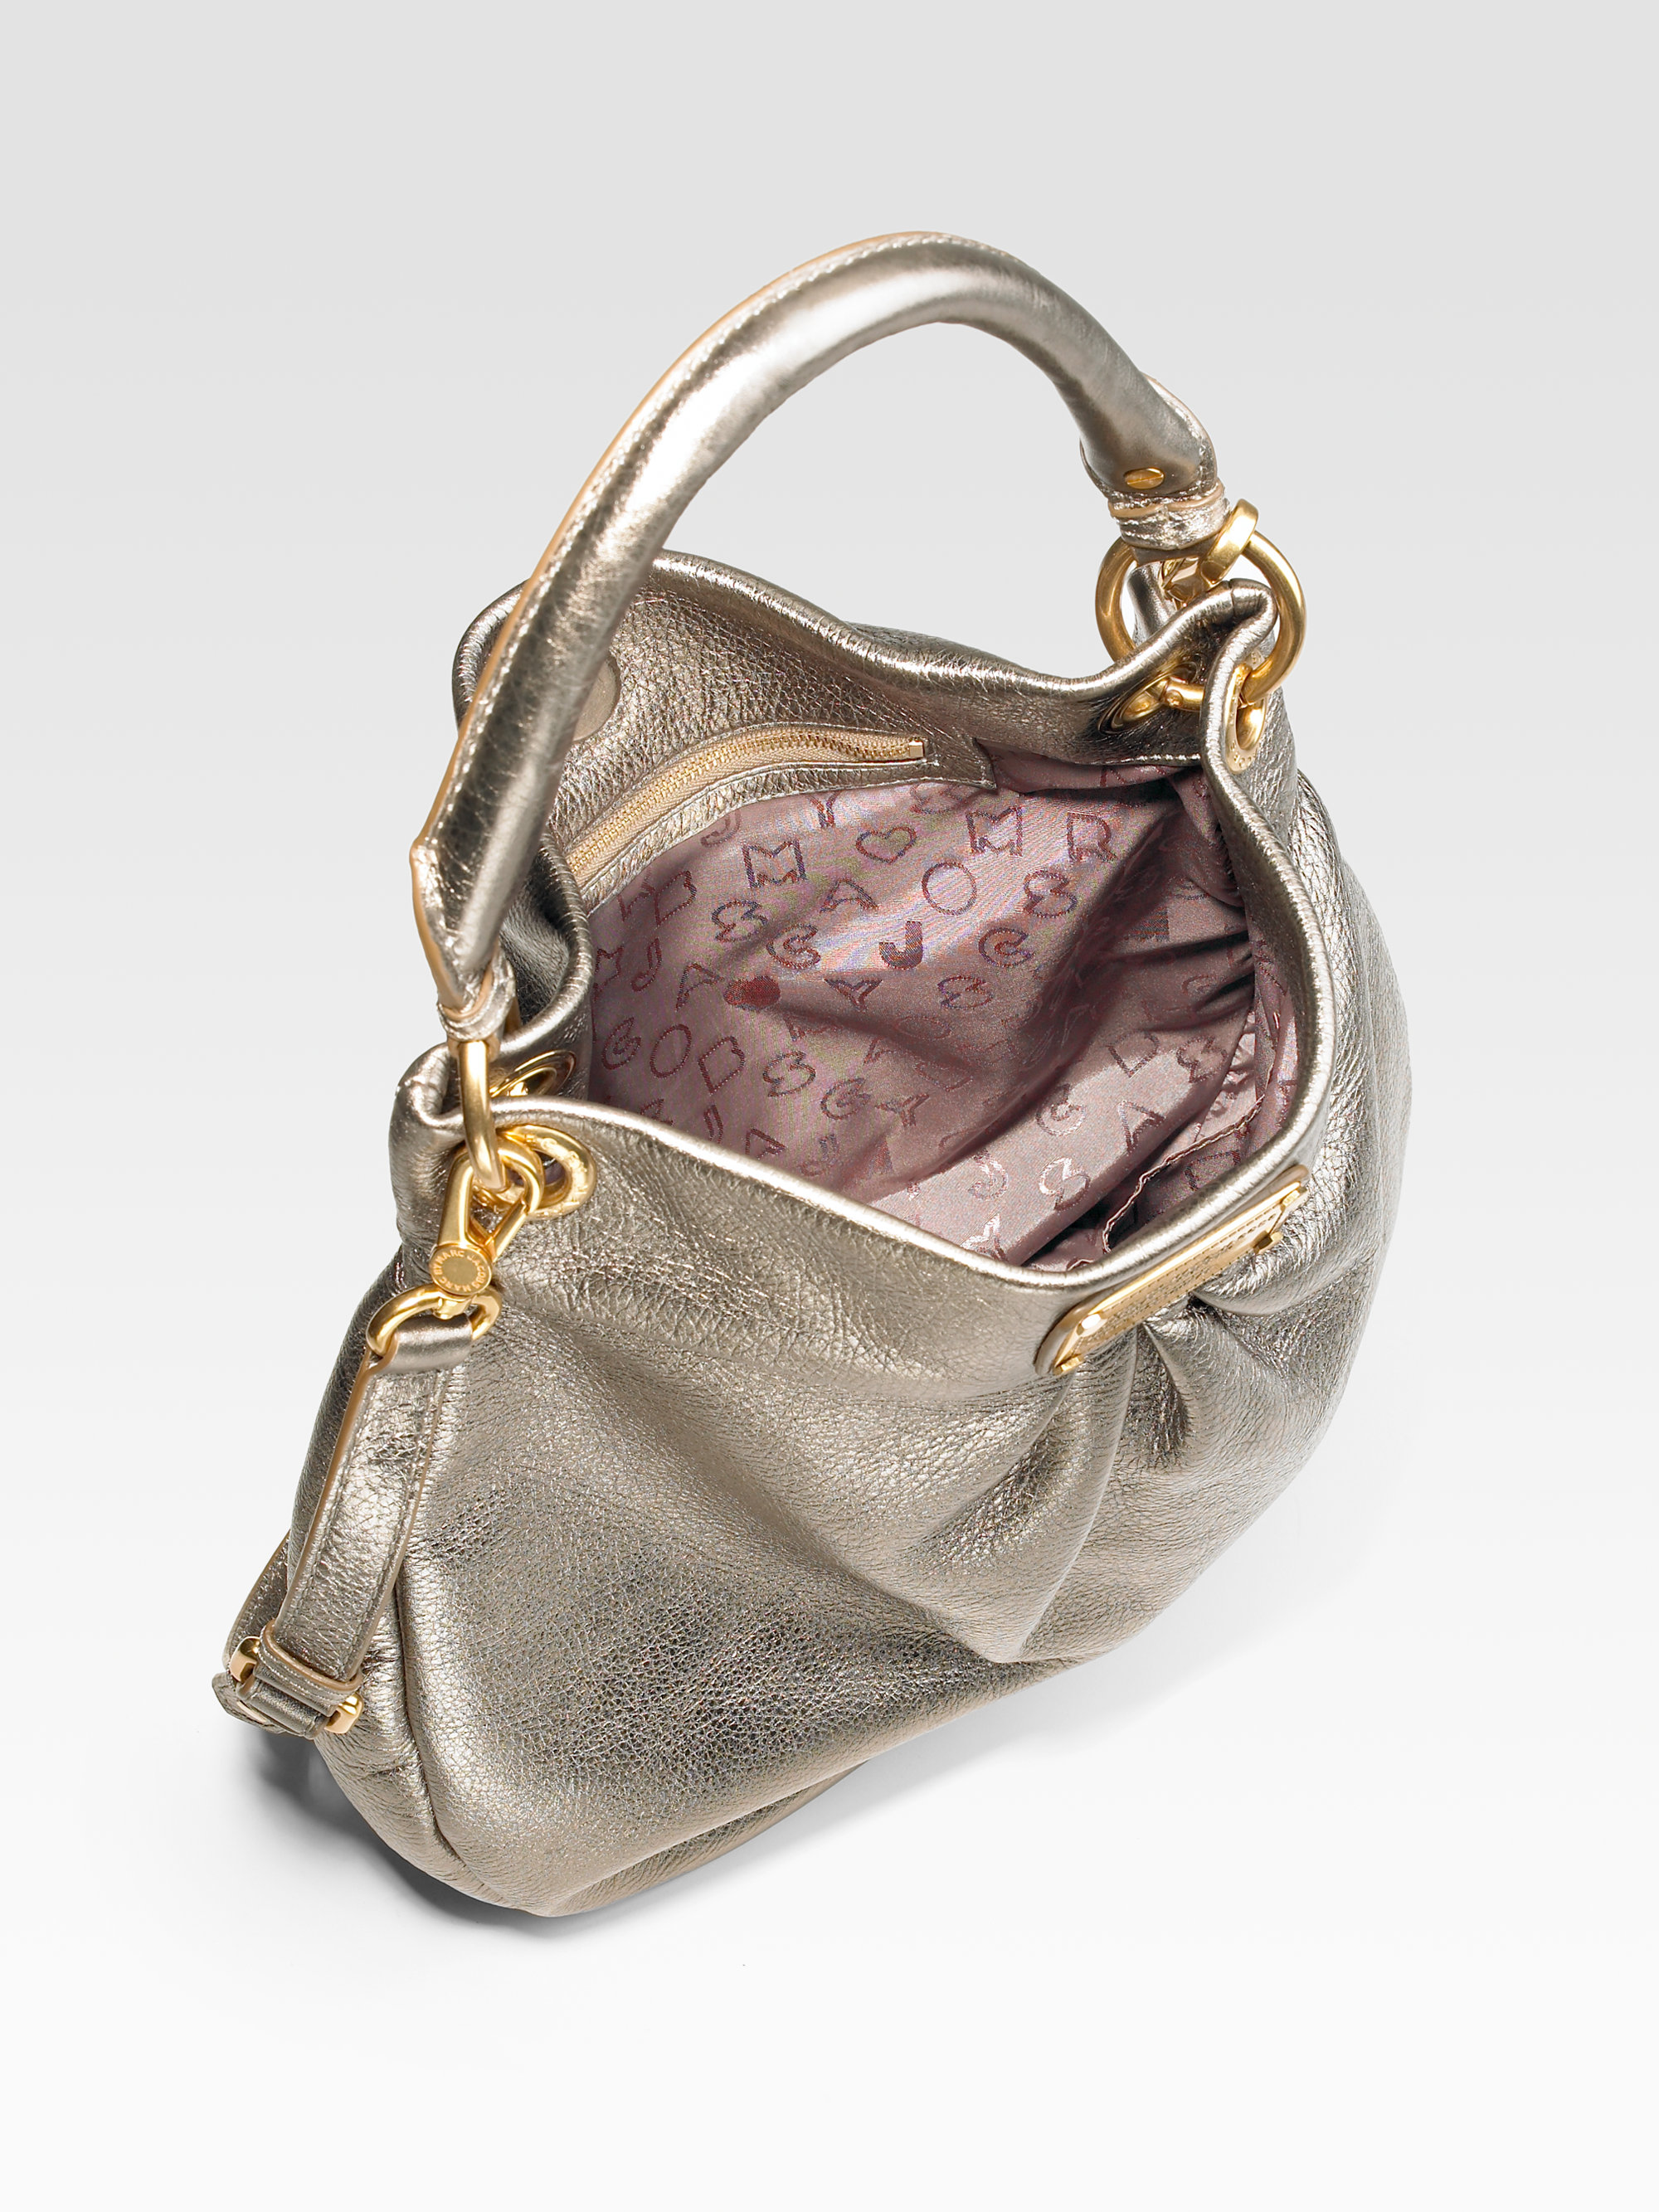 Marc by marc jacobs Classic Q Metallic Leather Hillier Hobo Bag in Metallic | Lyst